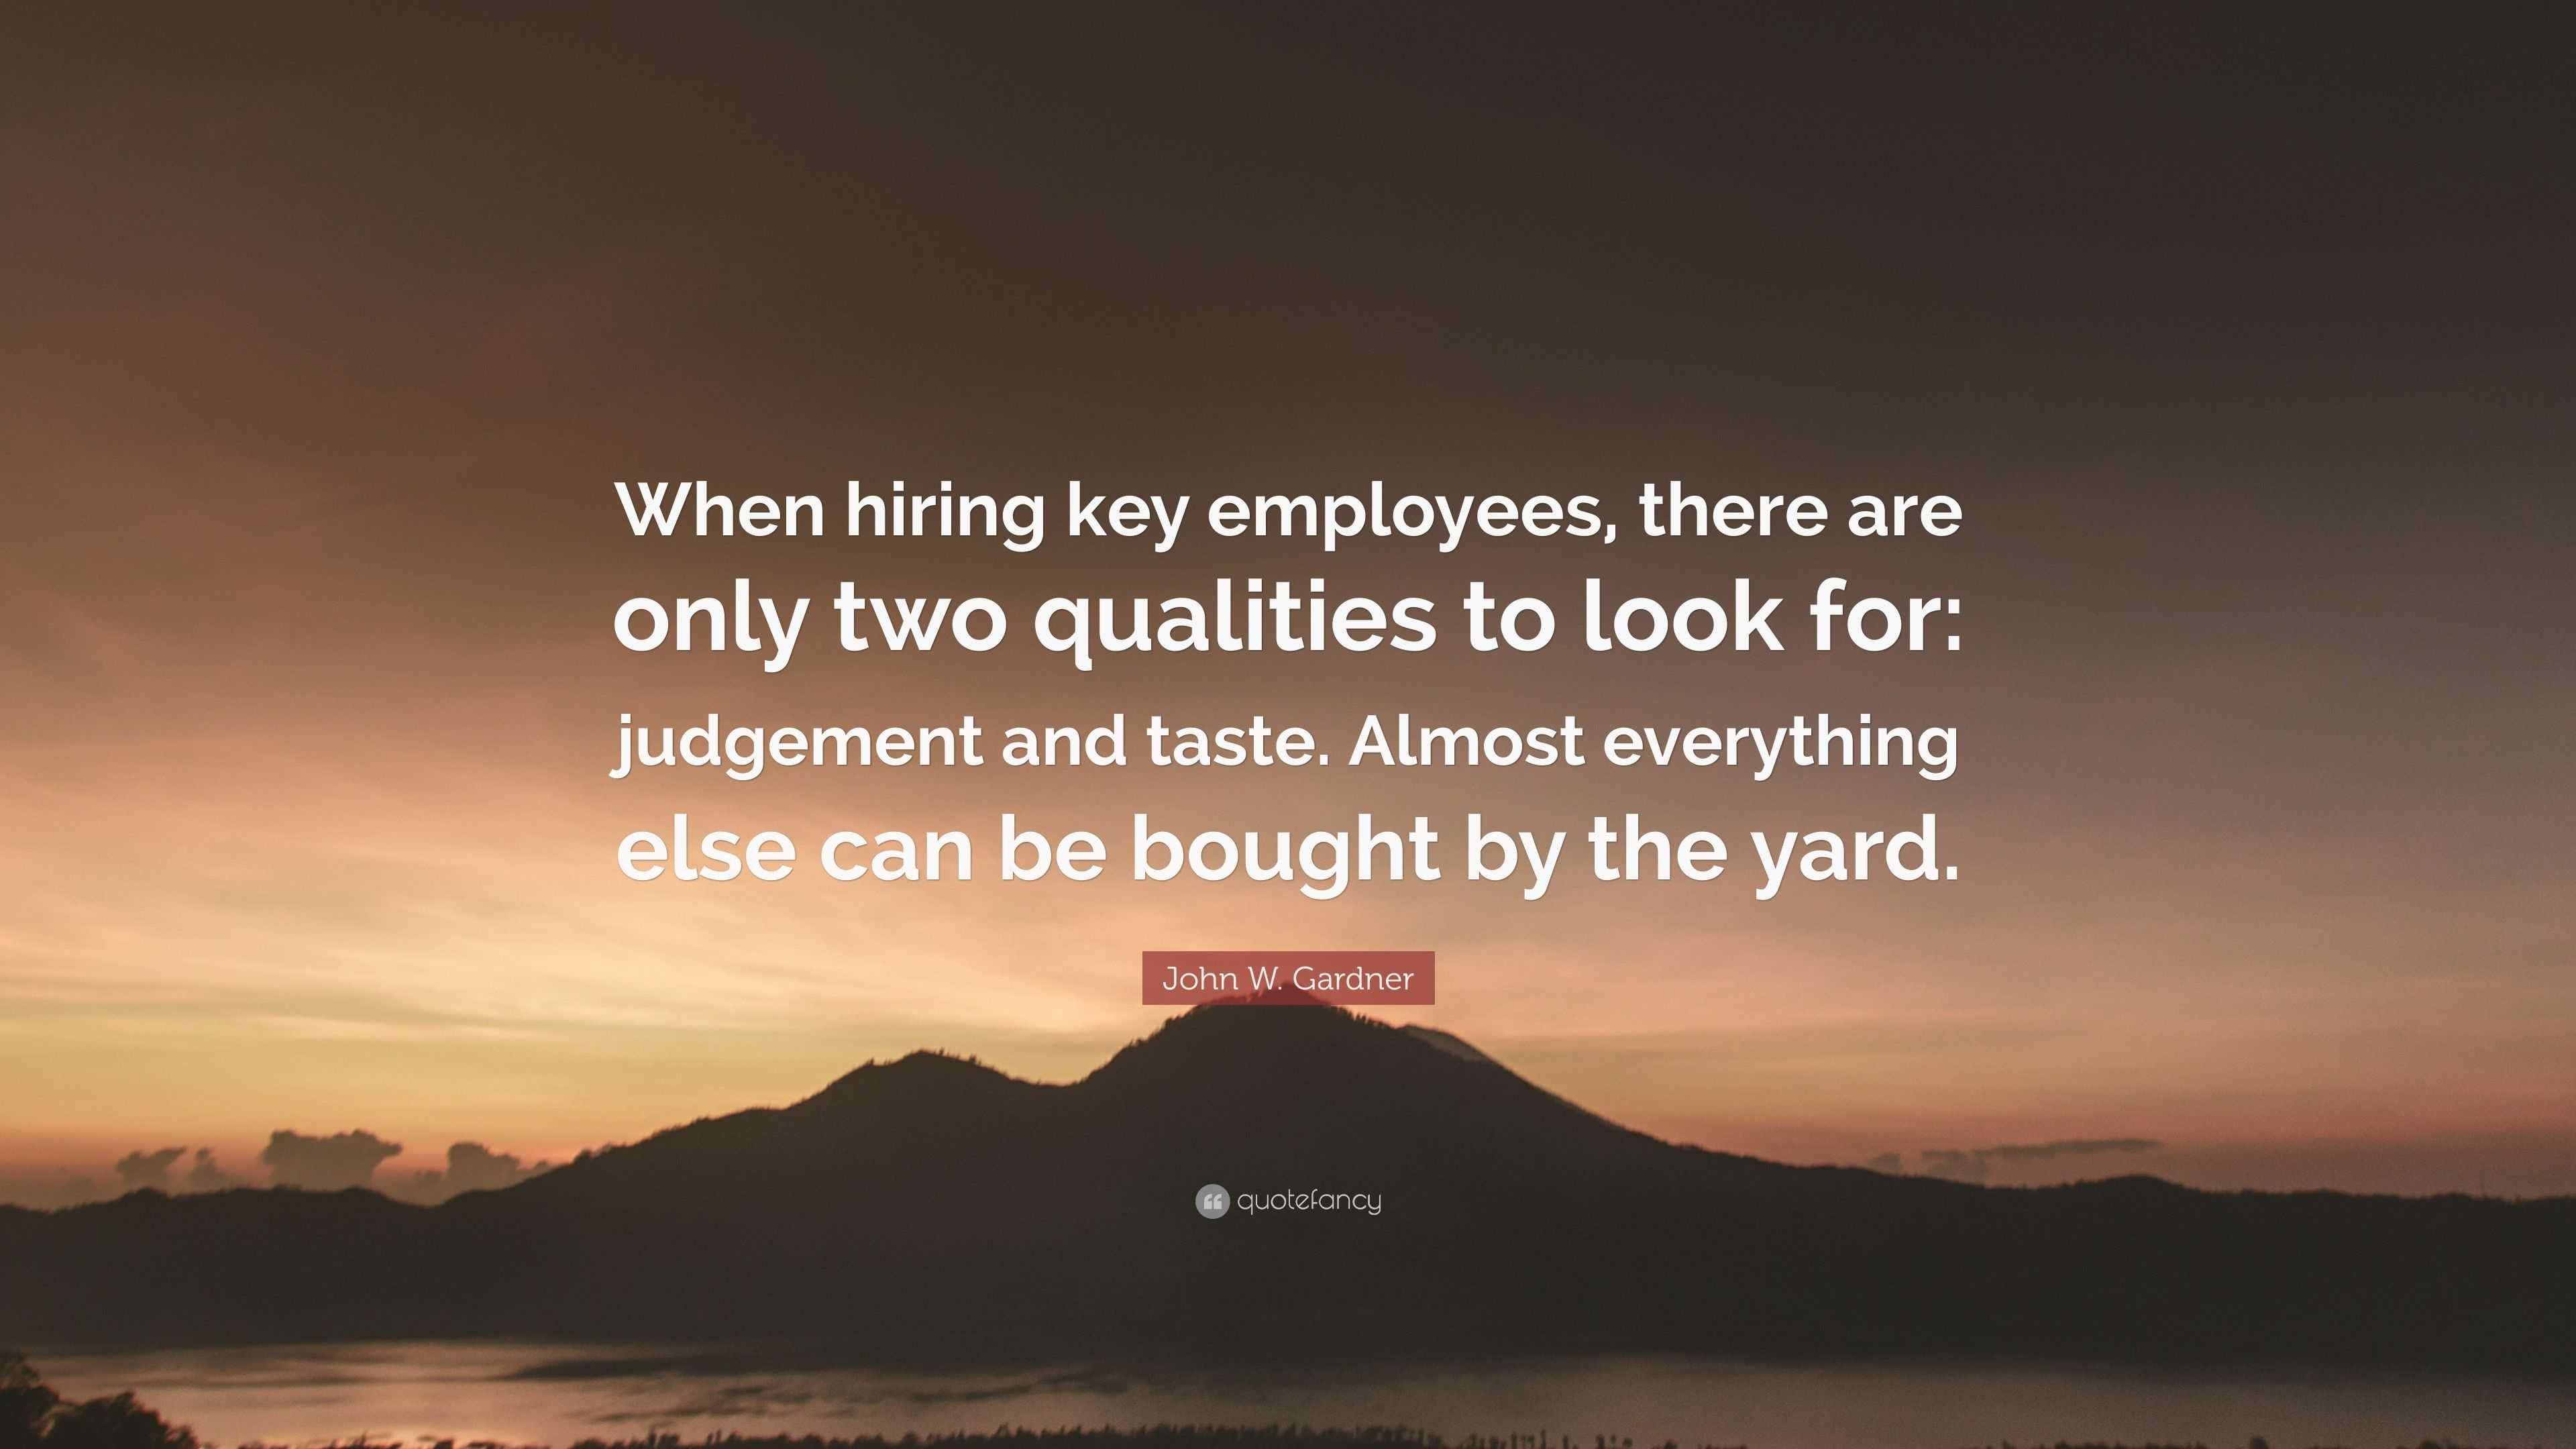 John W. Gardner Quote: "When hiring key employees, there ...